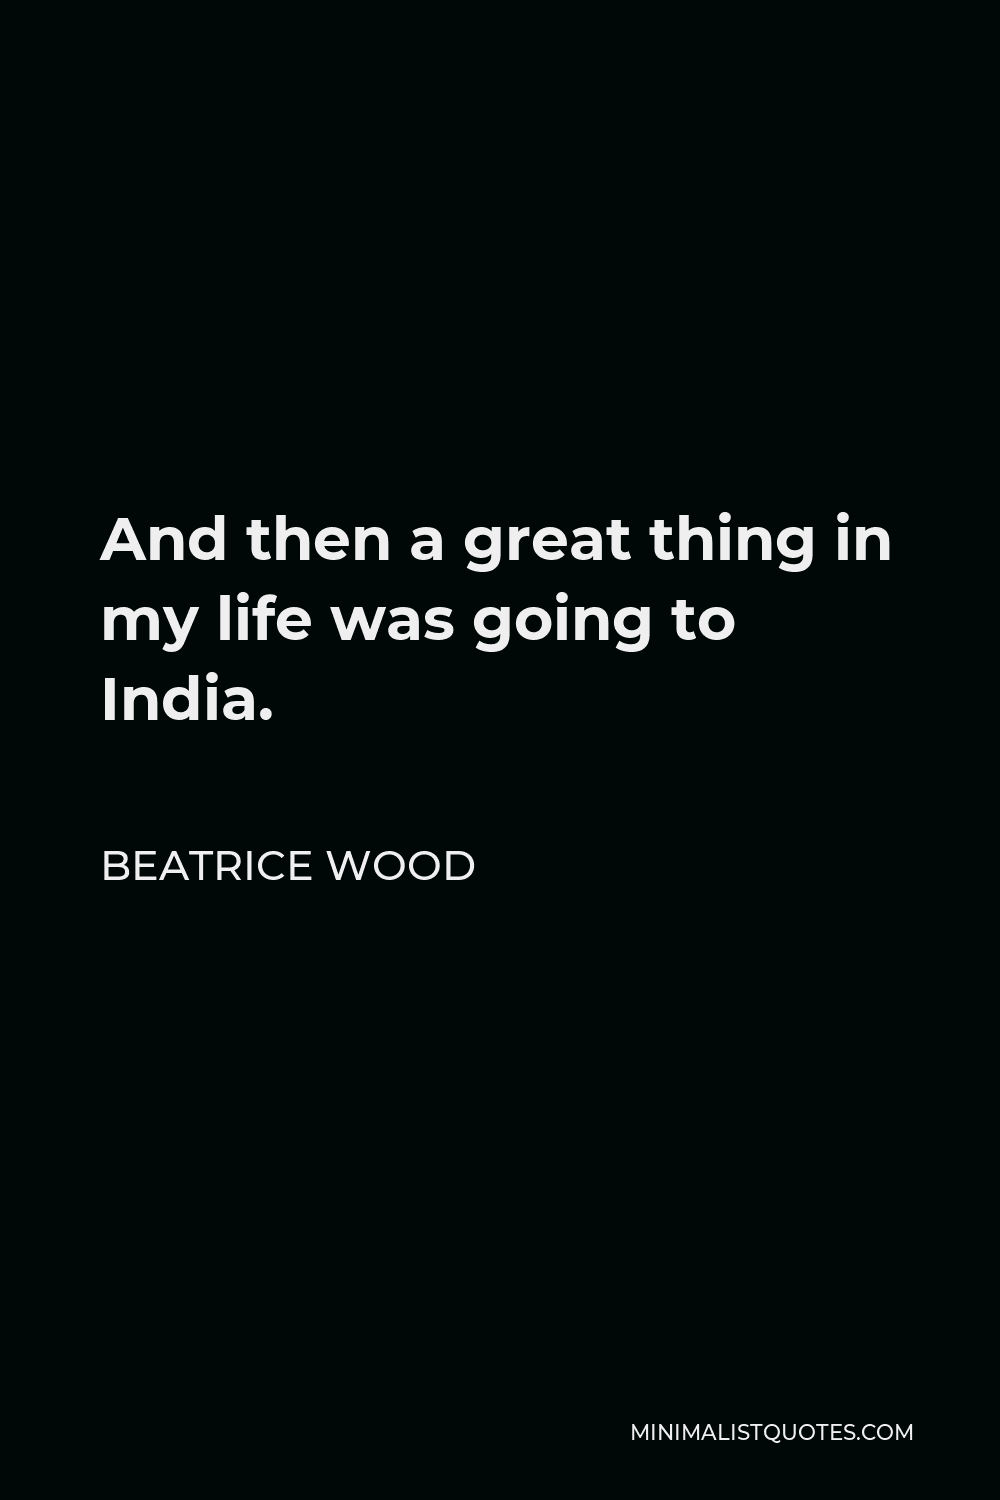 Beatrice Wood Quote - And then a great thing in my life was going to India.